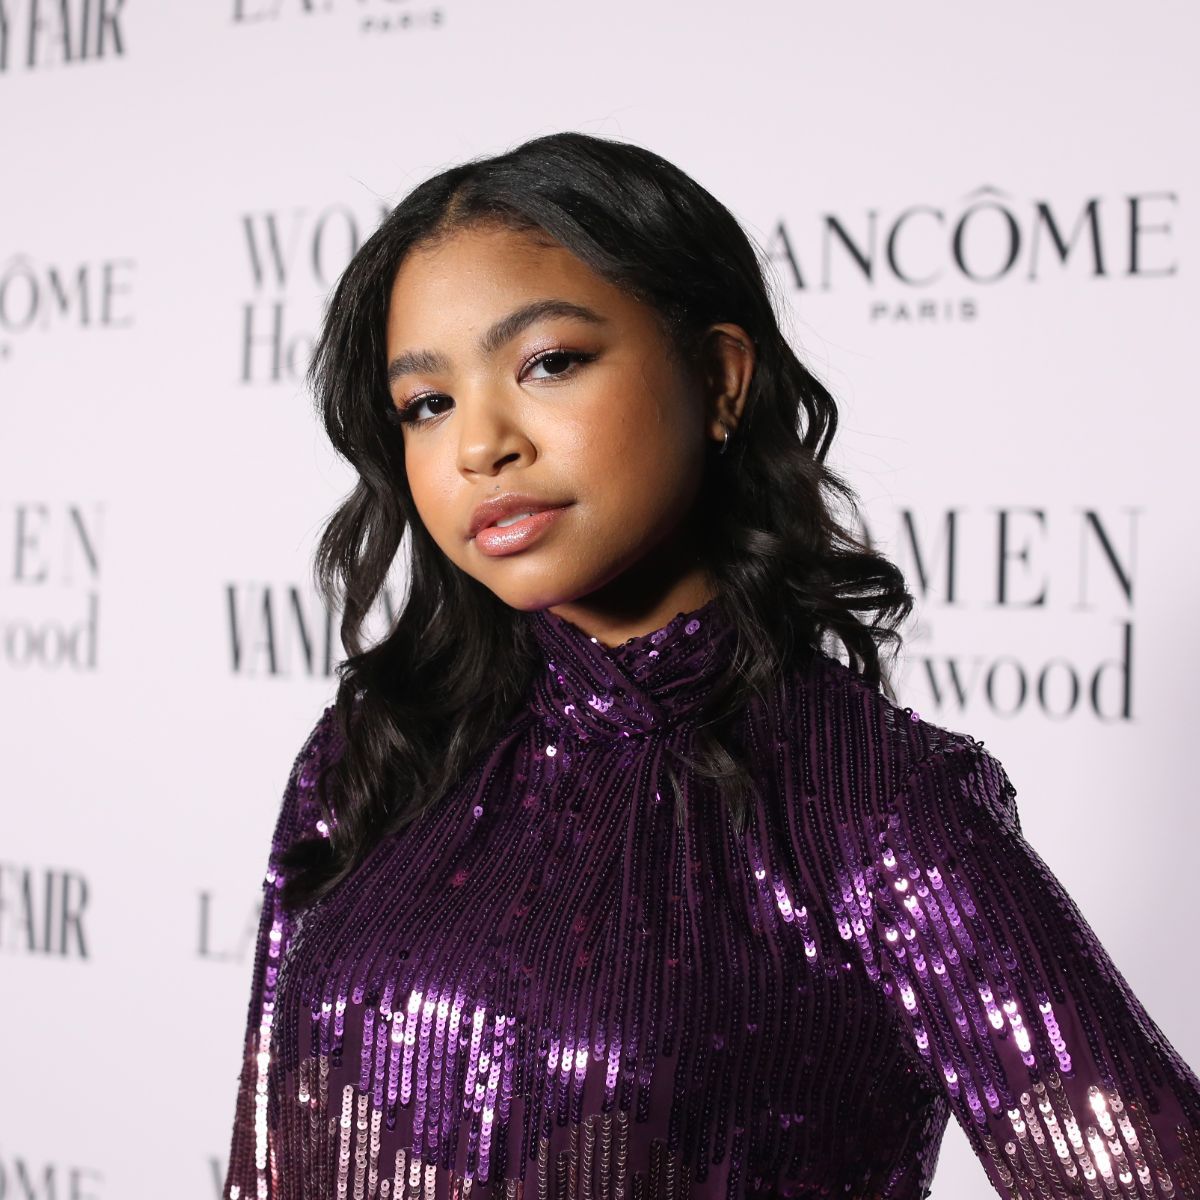 what is the net worth of Navia Robinson